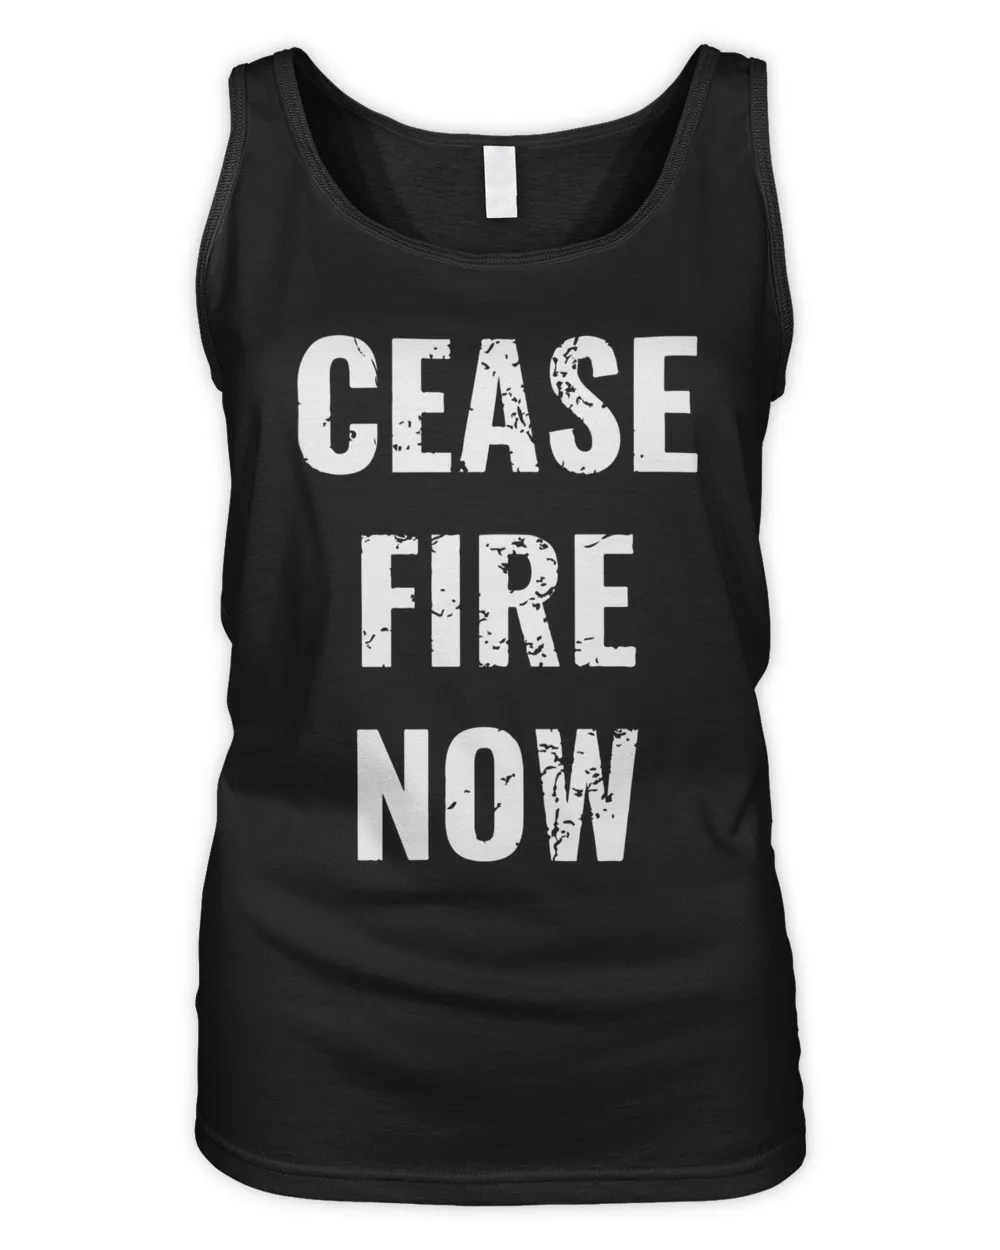 Stand for Peace: 'Cease Fire Now' Inspired Apparel and Drinkware Collection